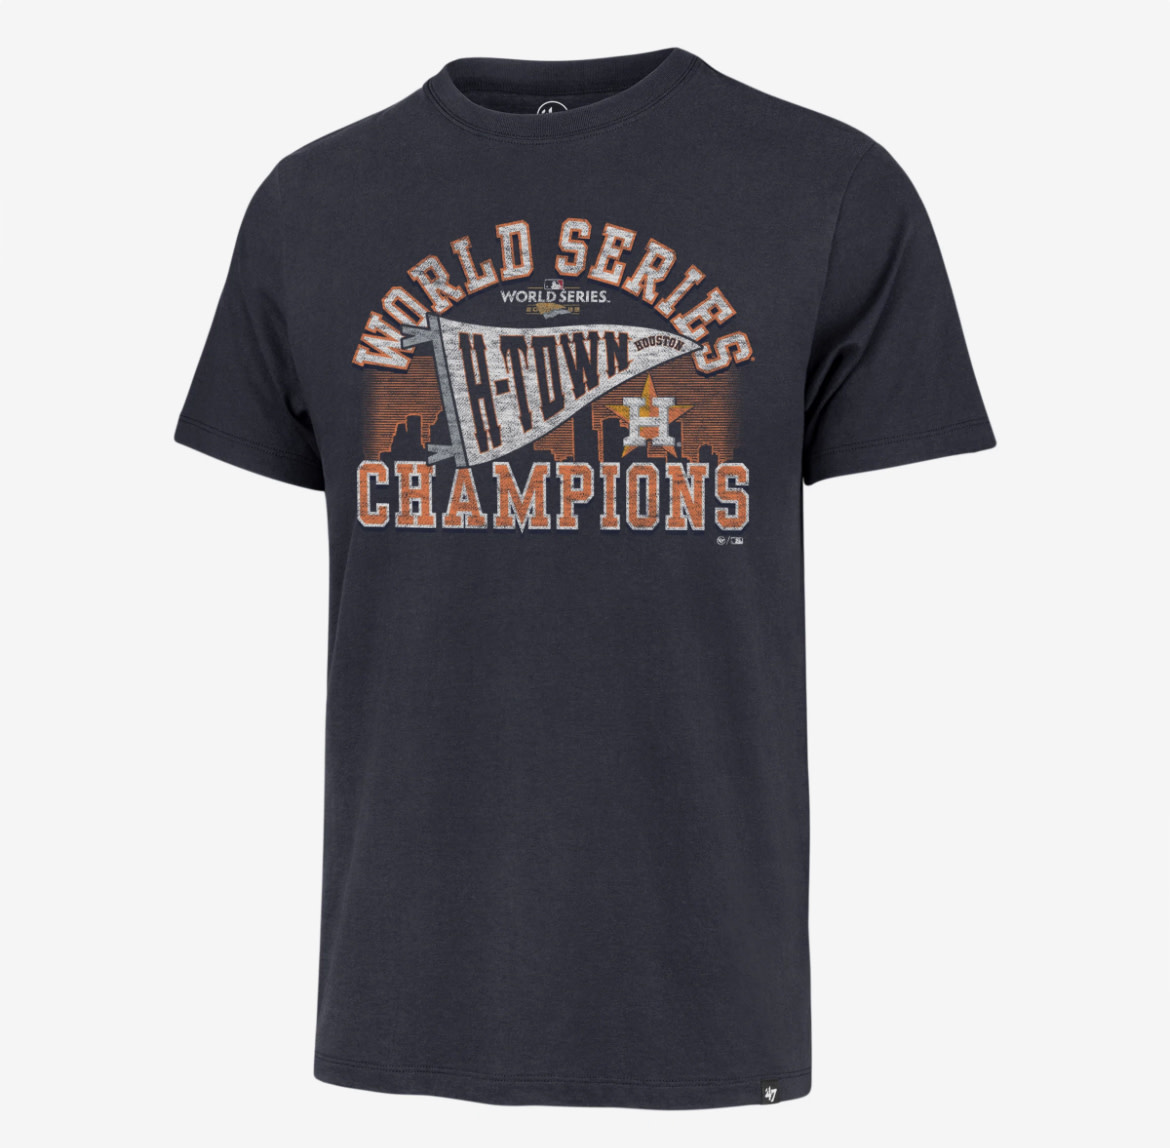 Astros Home 2022 World Series Champs 5950 - Eight One